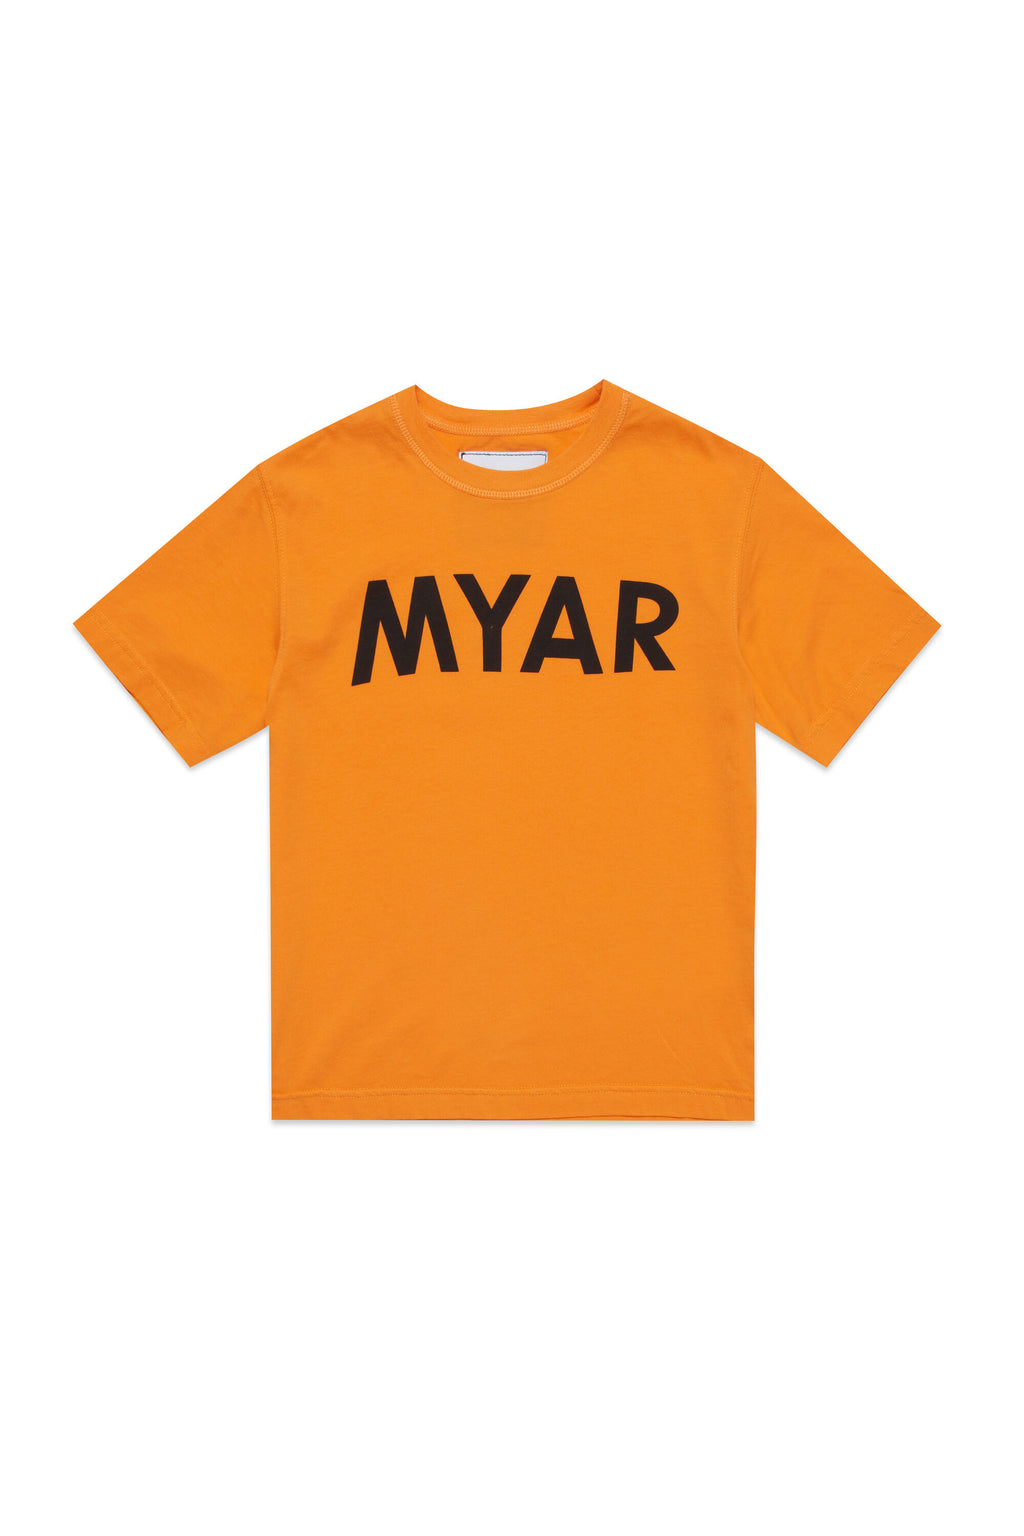 Crew-neck T-shirt in deadstock orange fabric with logo on the front